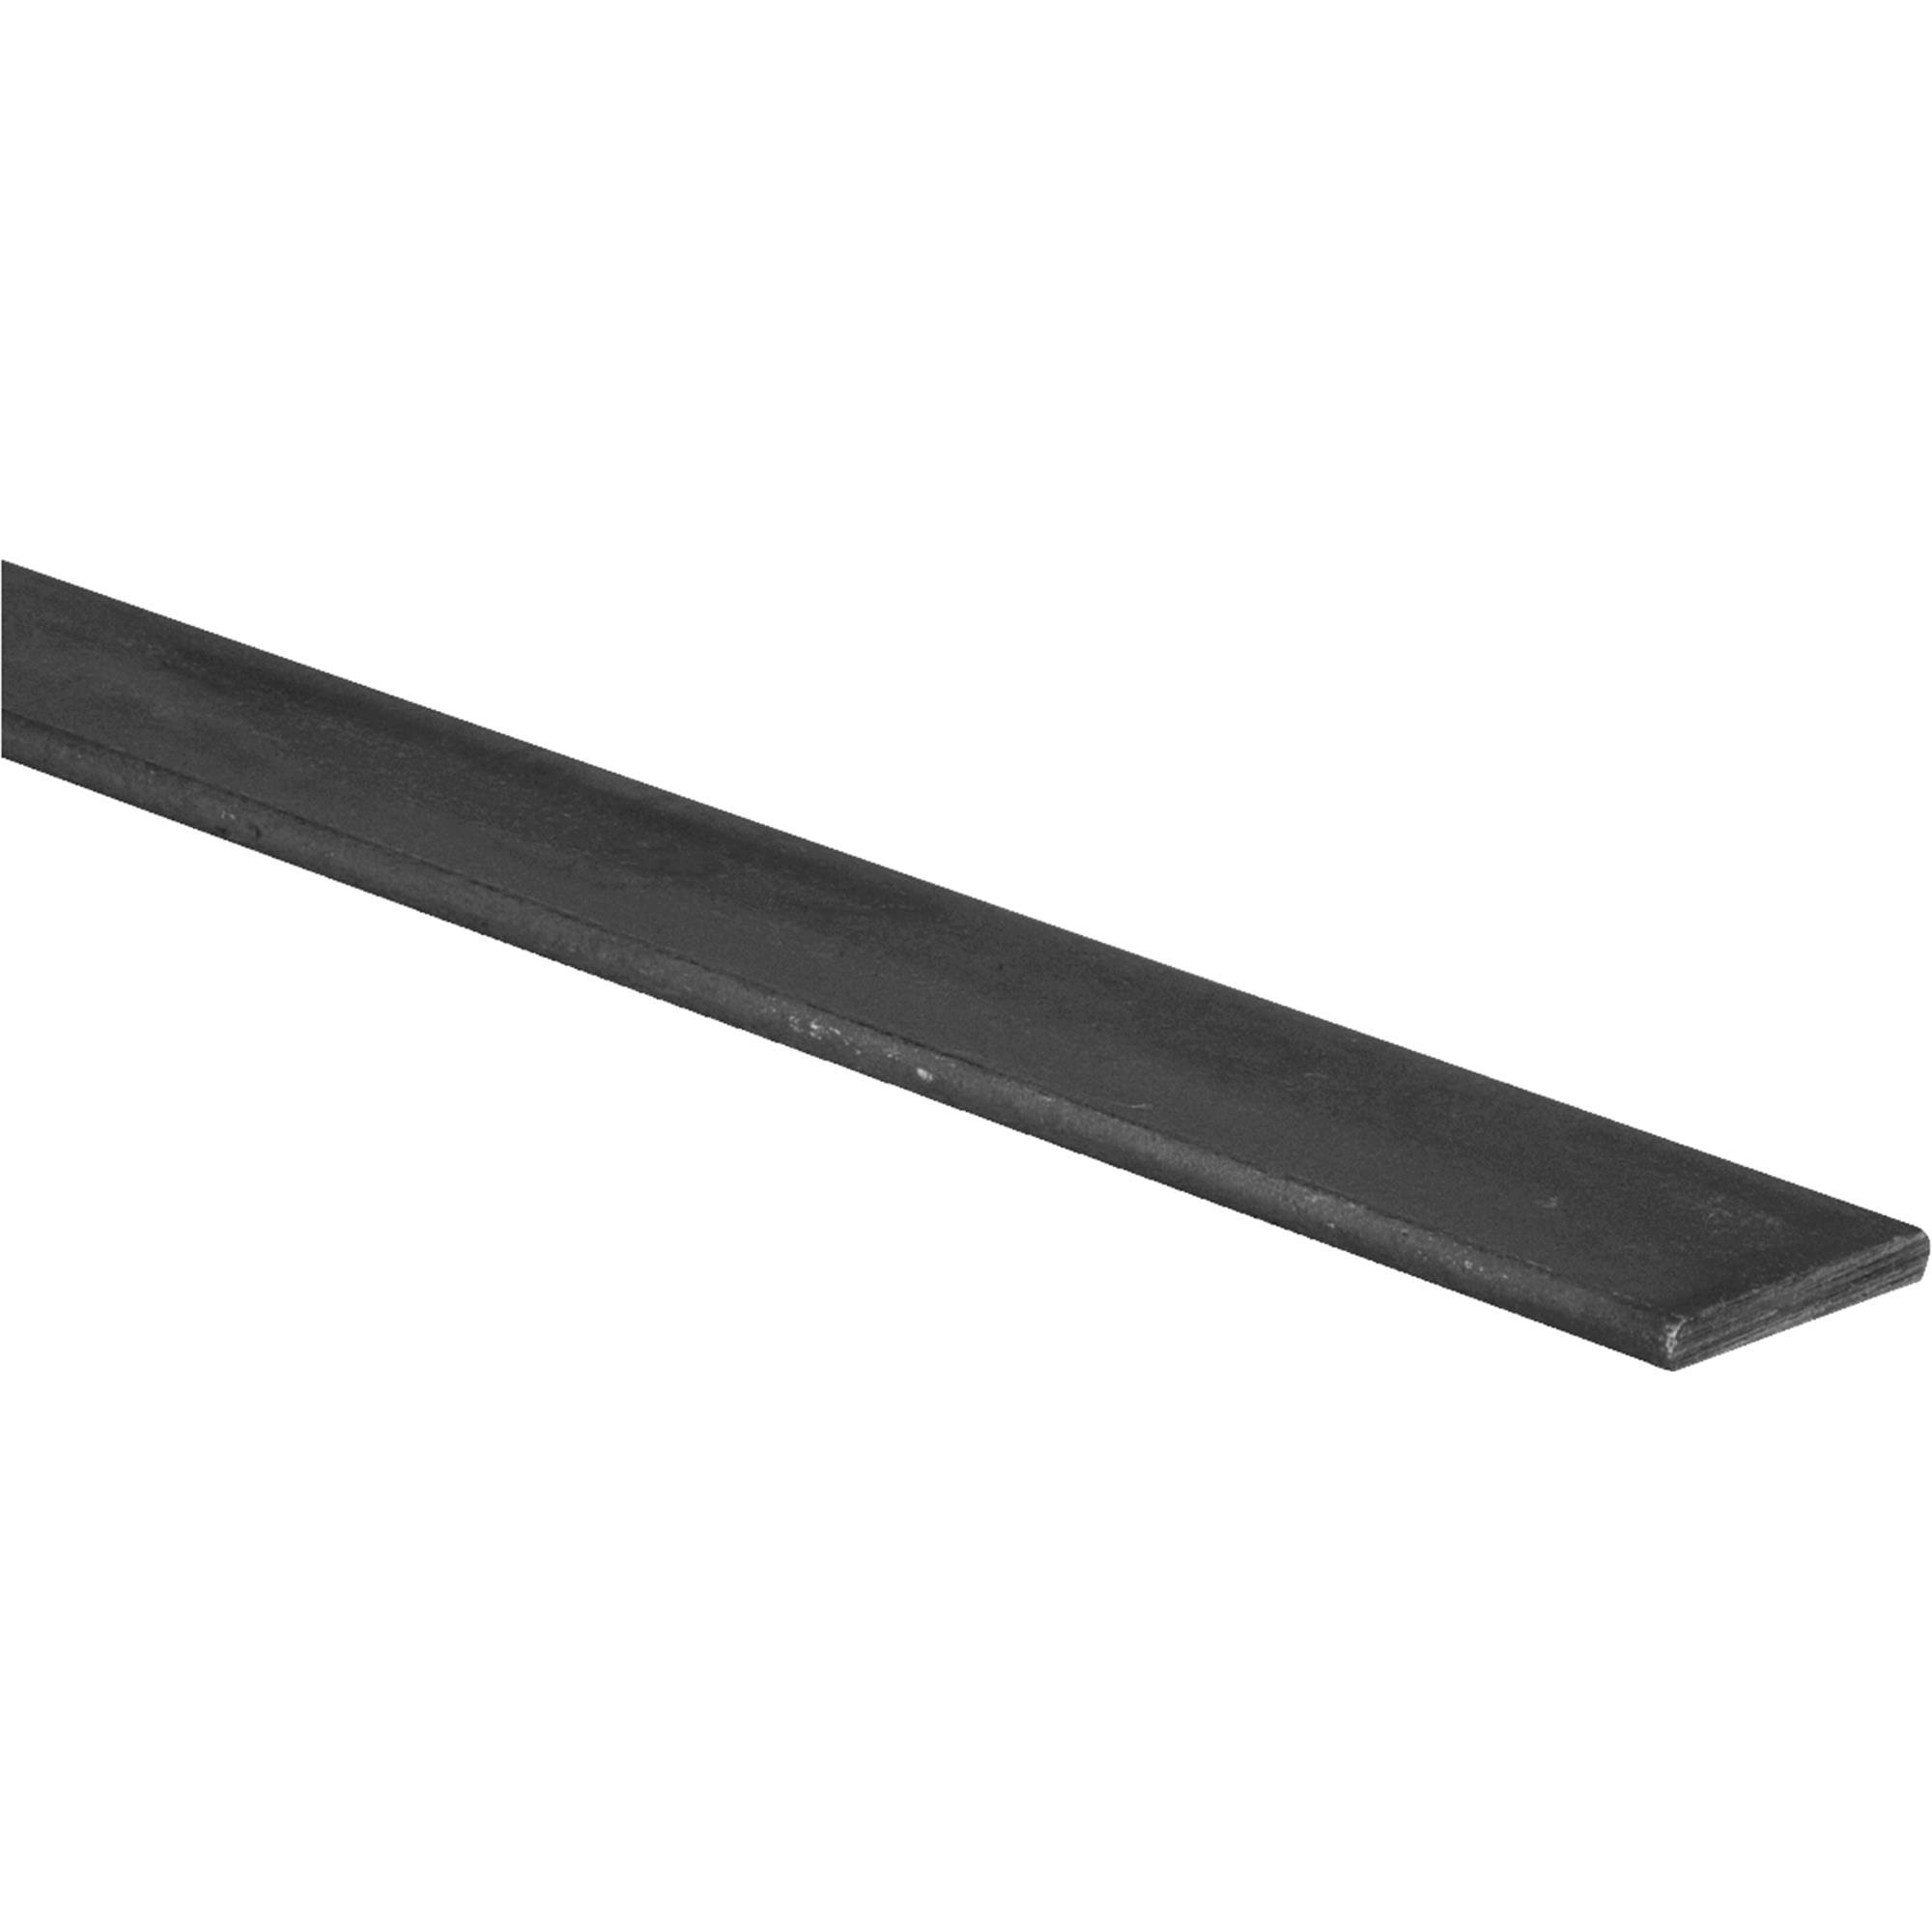 Steelworks Boltmaster 11687 Flat Steel Bar, 1/4 x 3.8cm x 120cm | Garage | Free Shipping on All Orders | 30 Day Money Back Guarantee